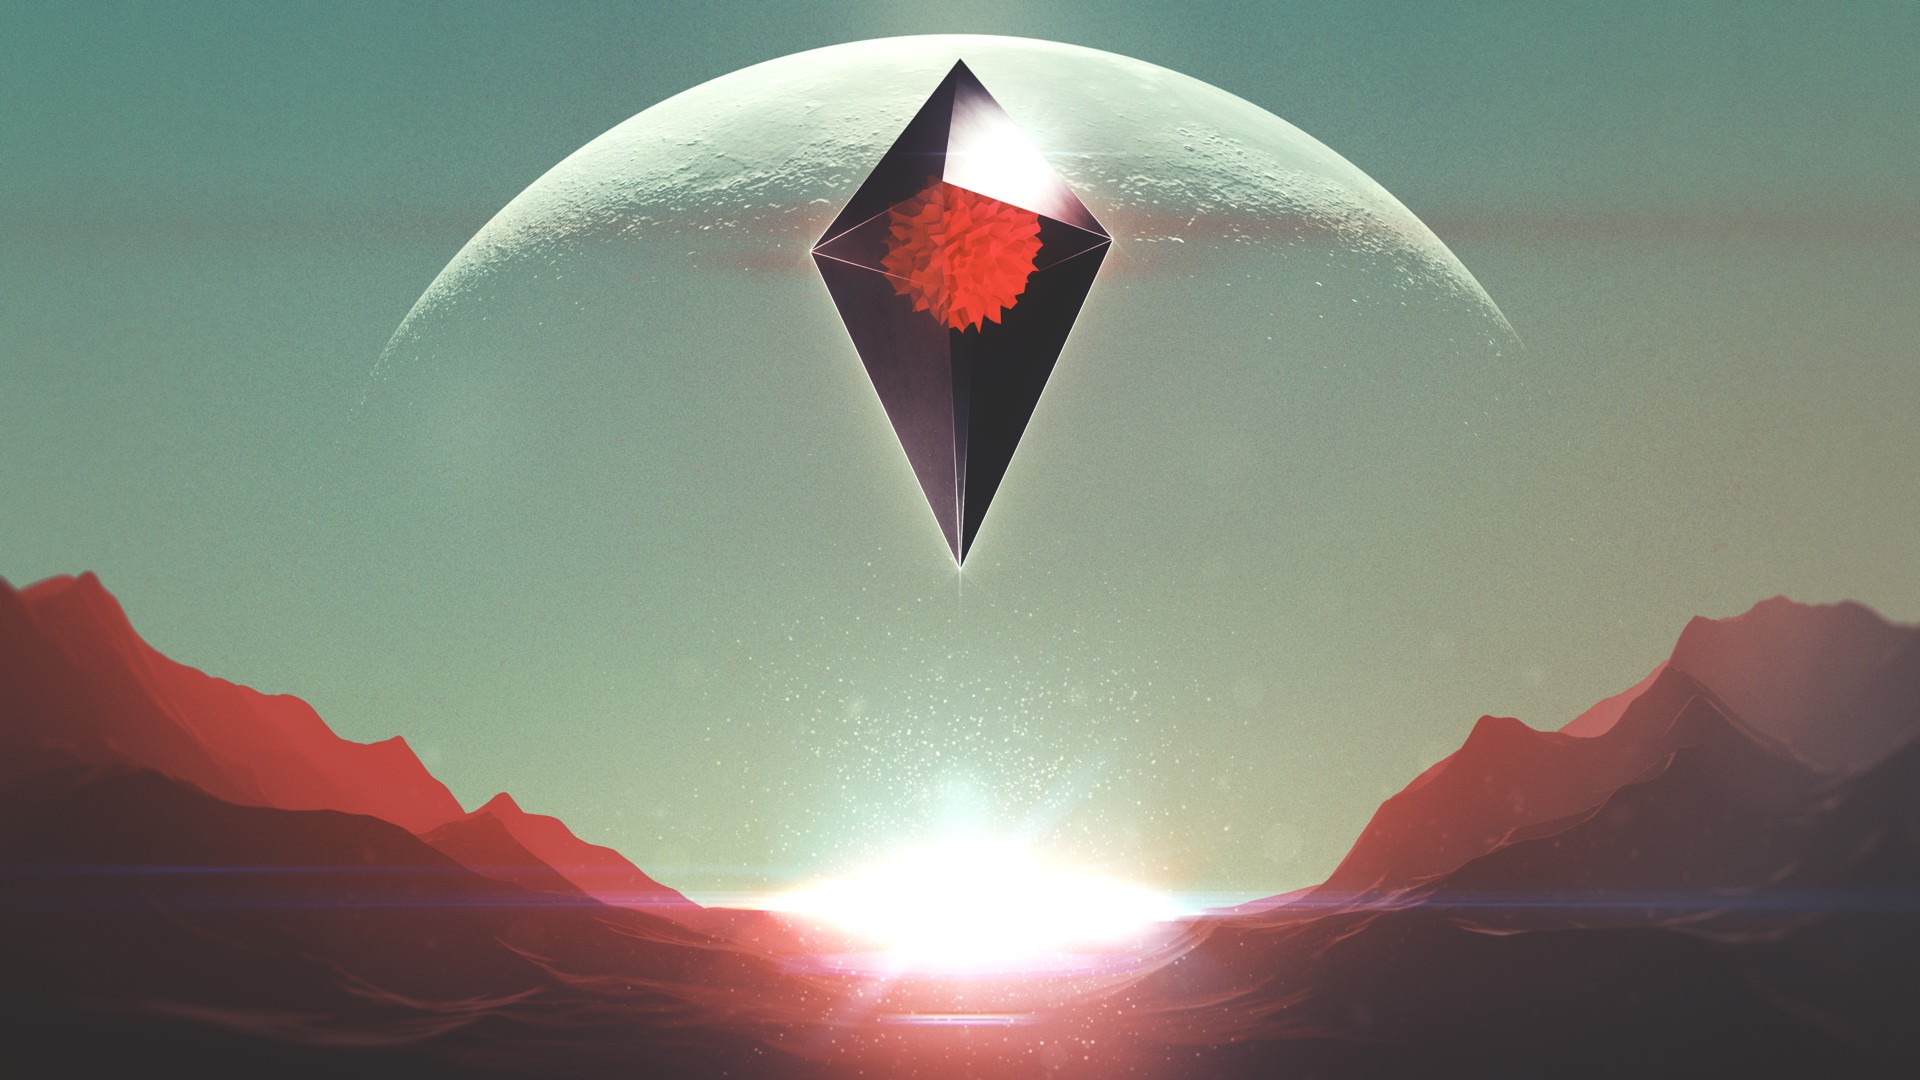 General 1920x1080 No Man's Sky video games PC gaming science fiction video game art sky